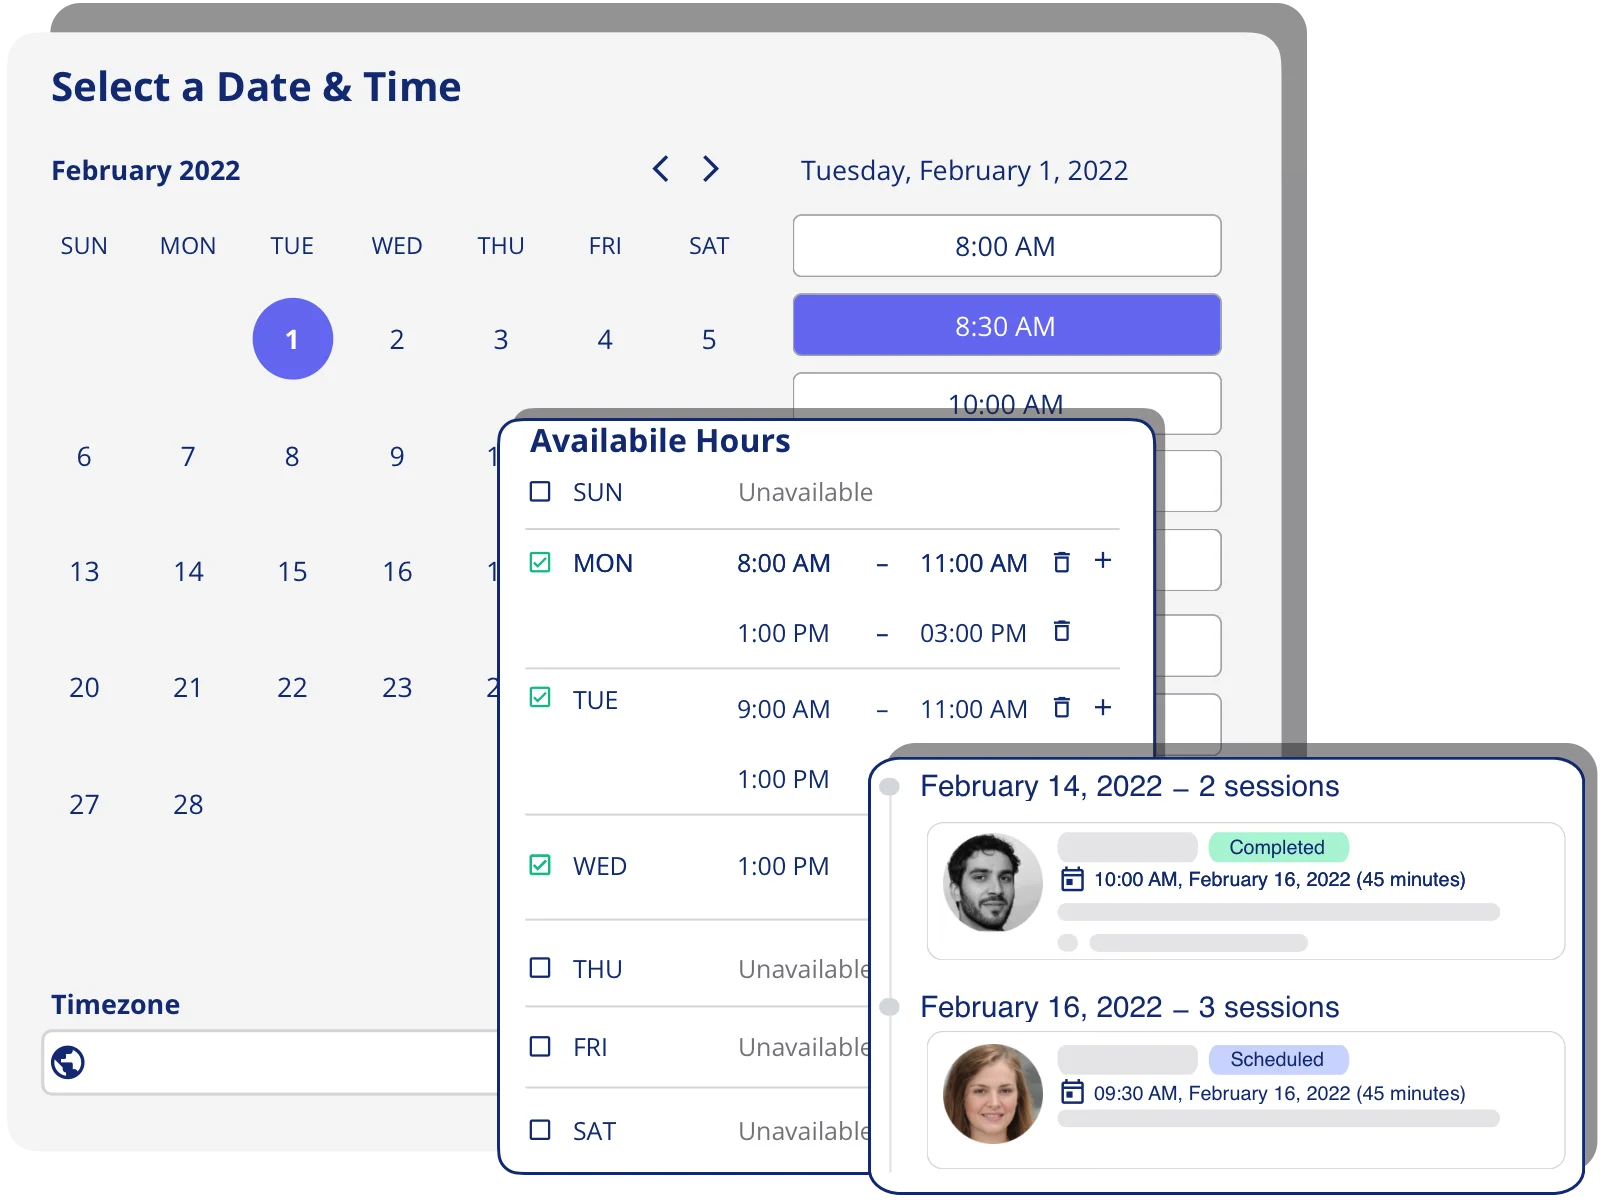 OpenQ Scheduler helps you automate scheduling user interviews end-to-end. No more back-and-forth over email. Just connect your calendar and invite some users and watch interviews get booked on your calendar automatically.